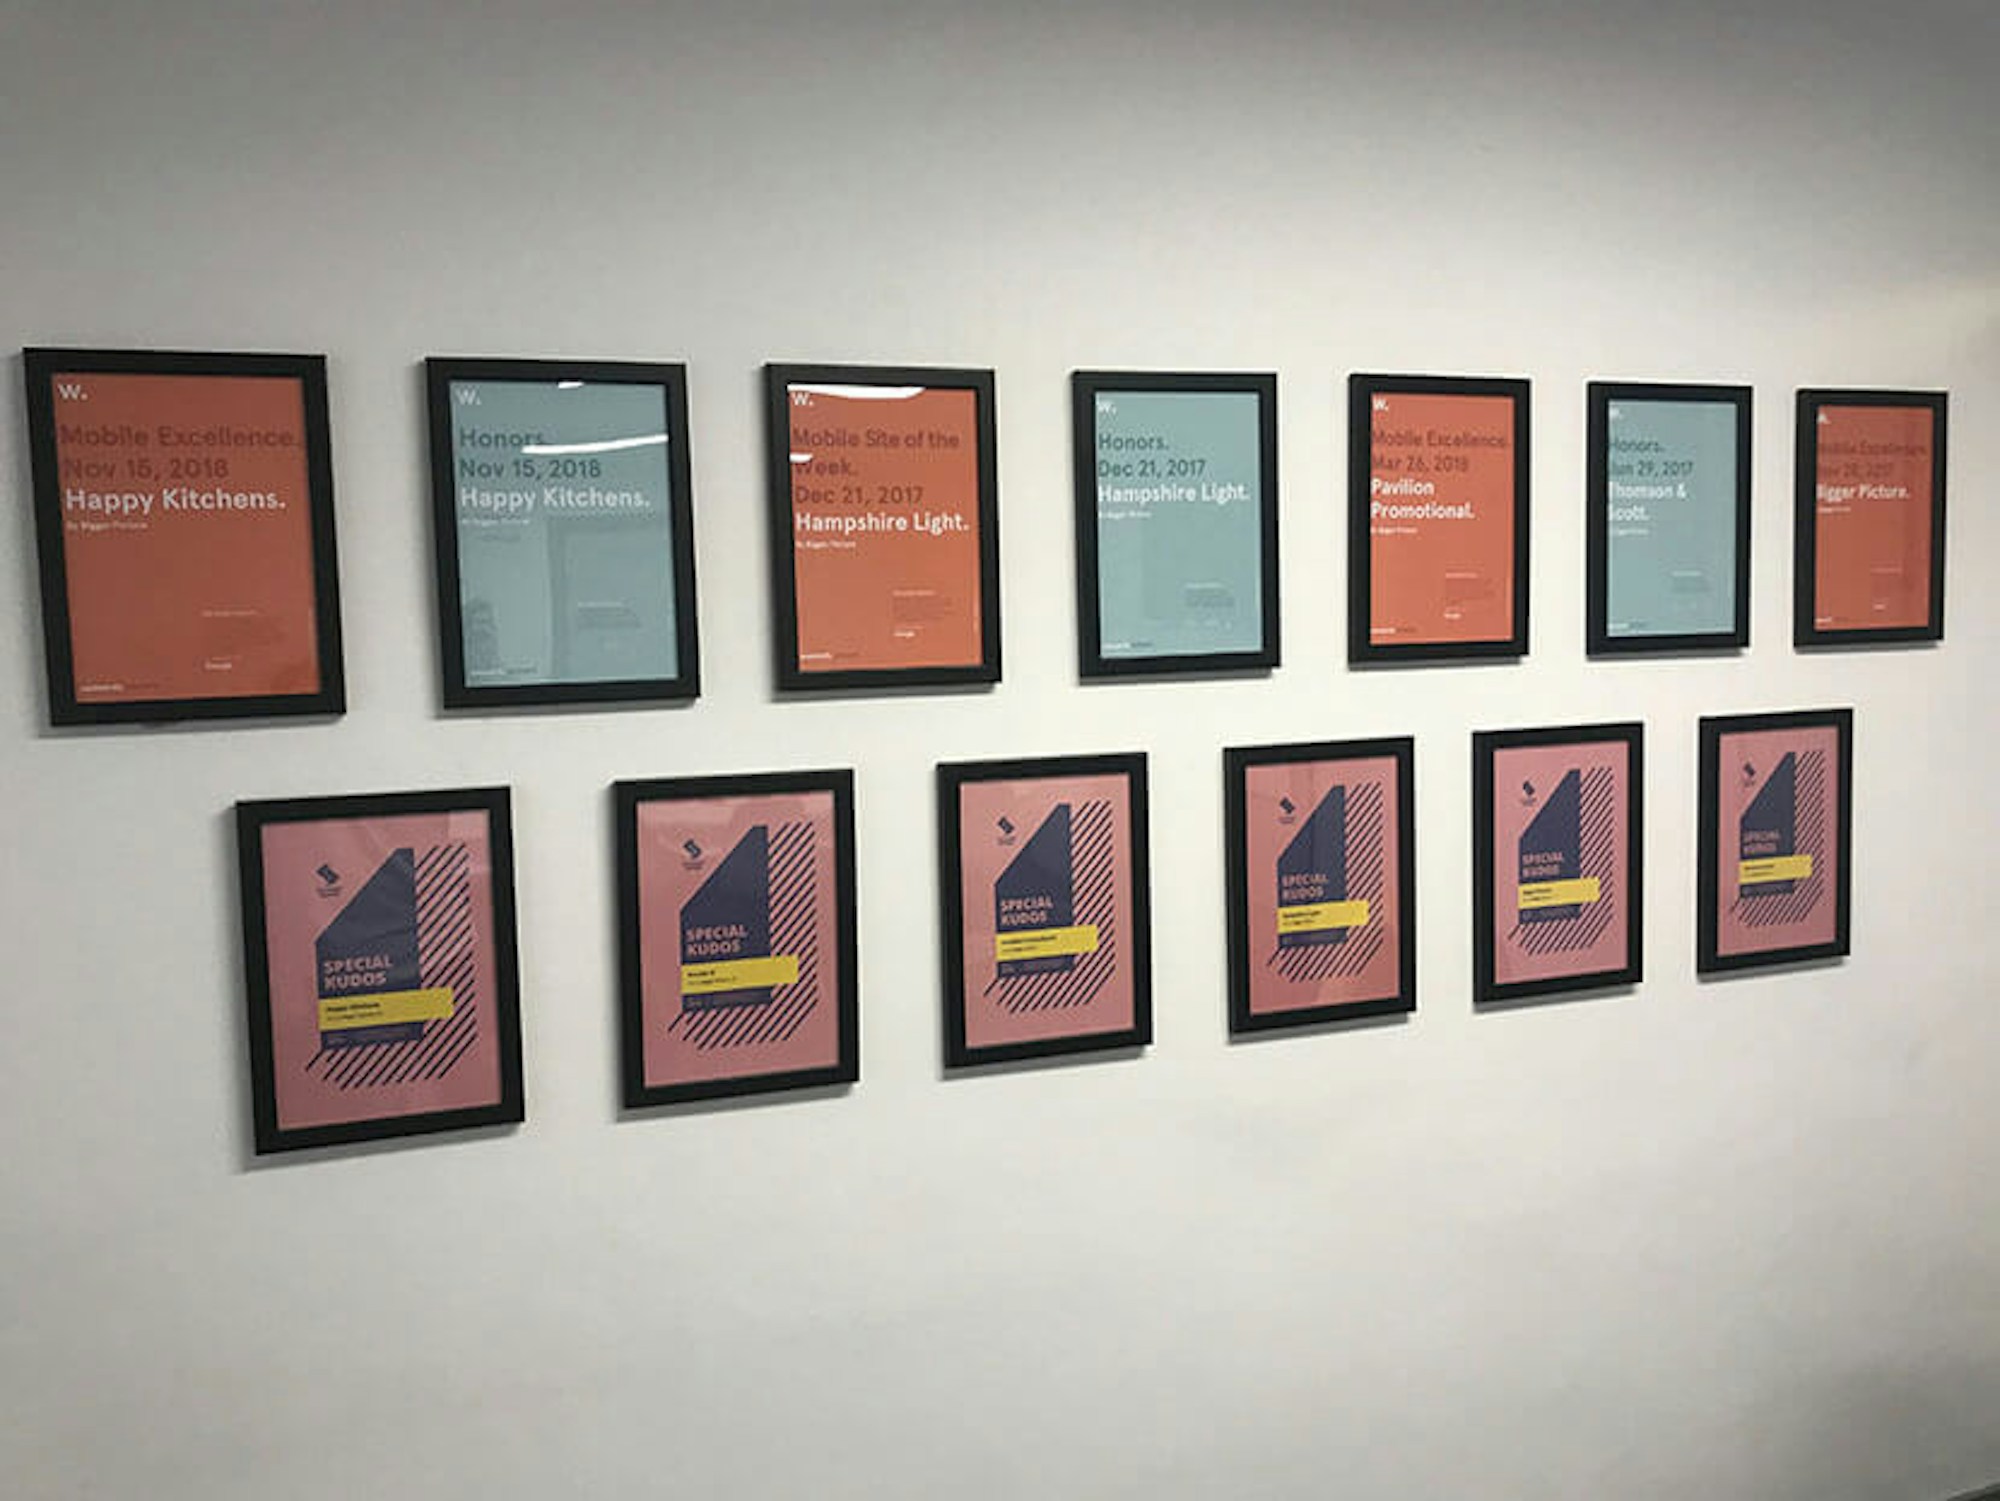 Bigger Picture's certificate wall